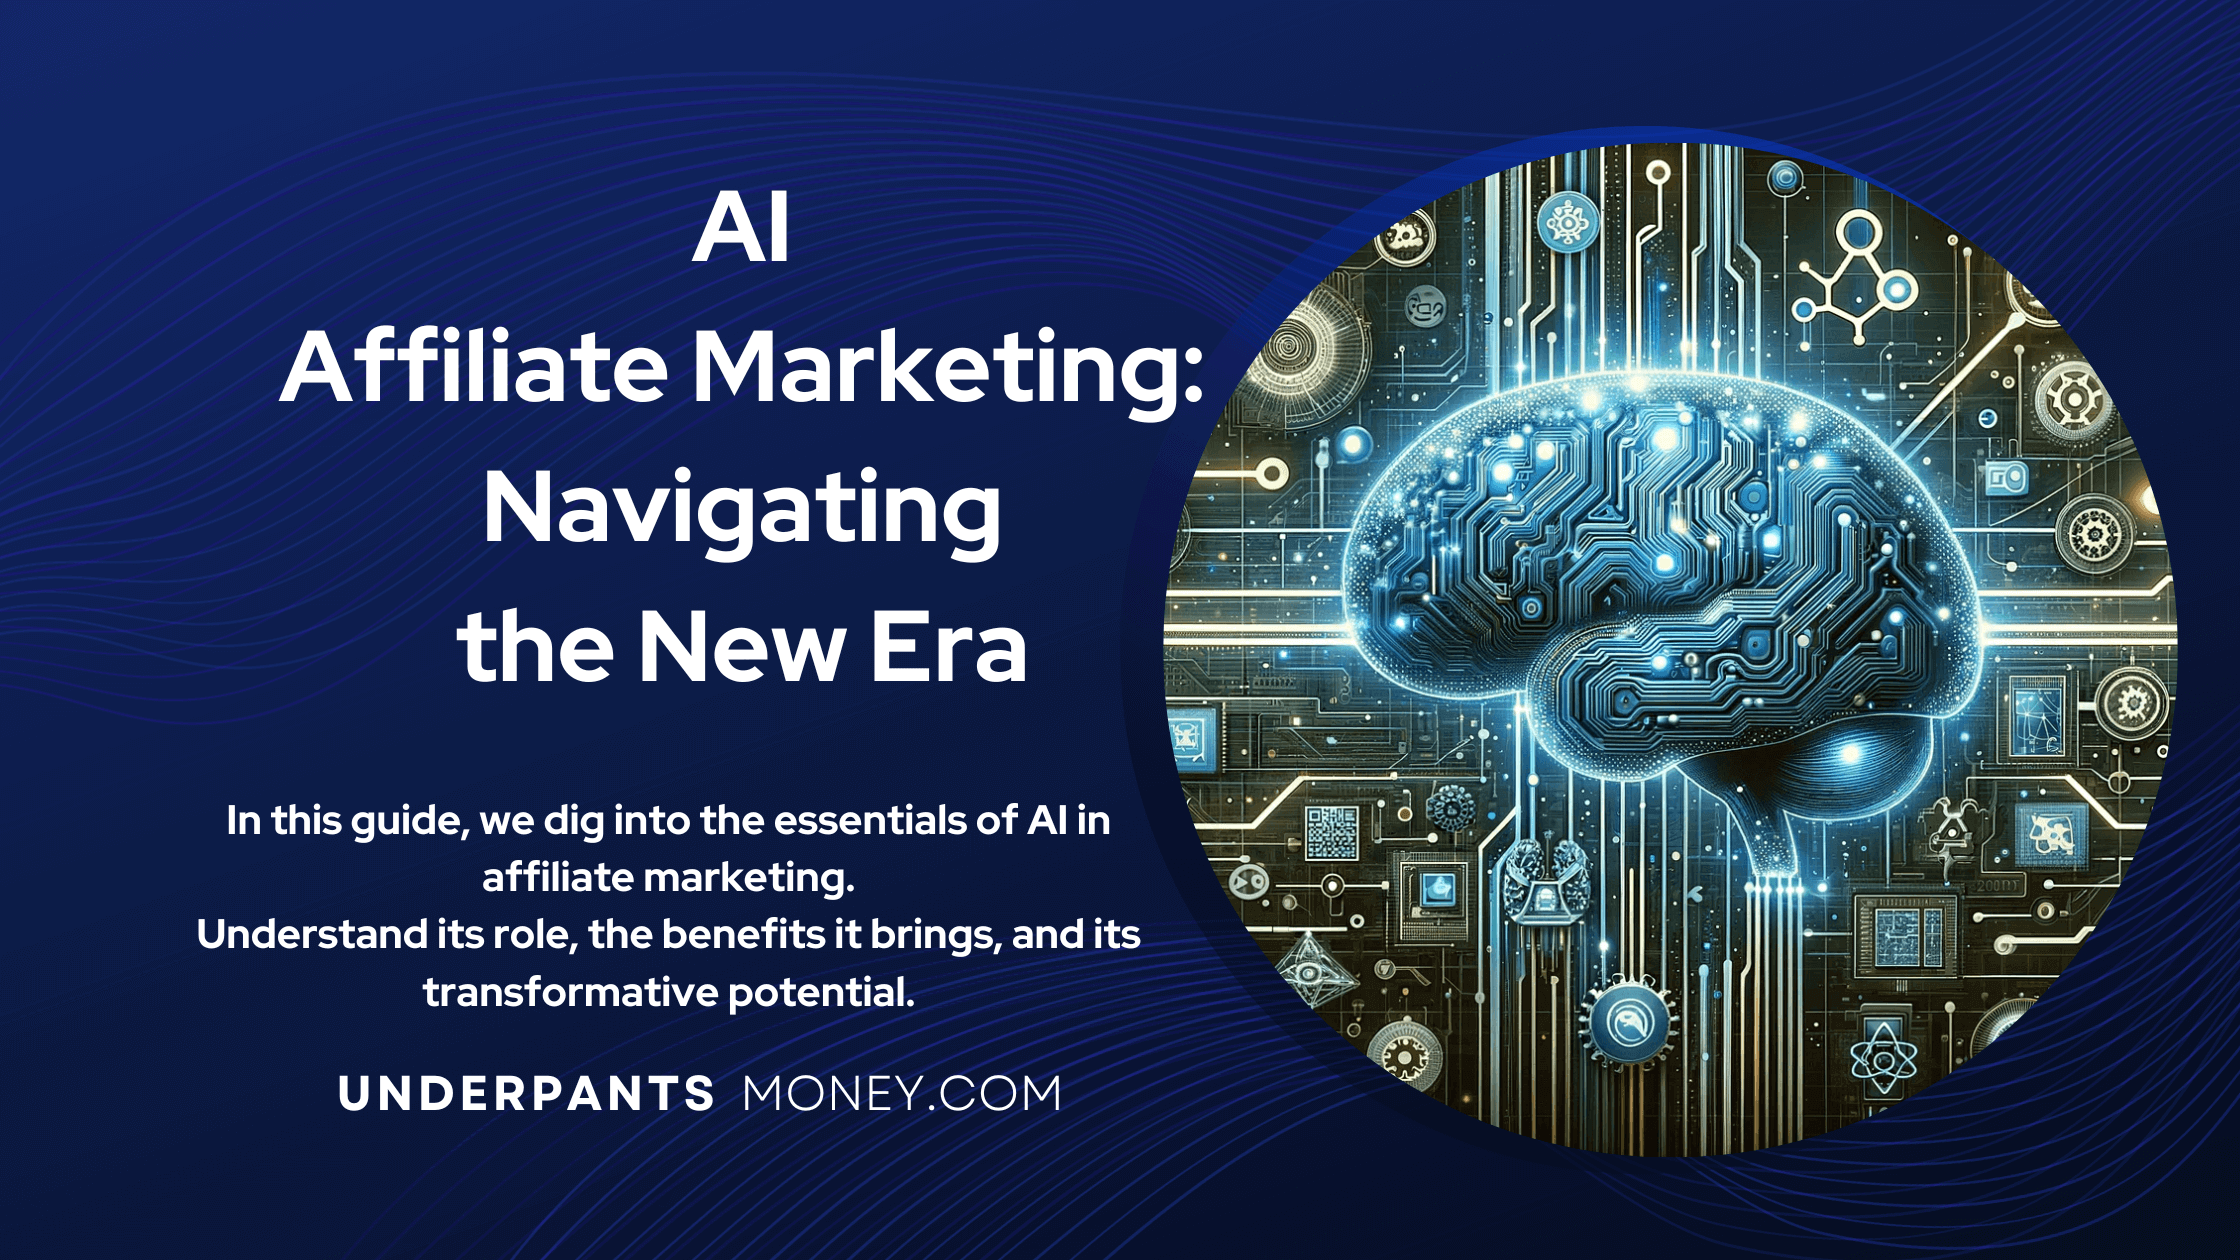 AI Affiliate marketing title with description on blue with image of ai brain to the right